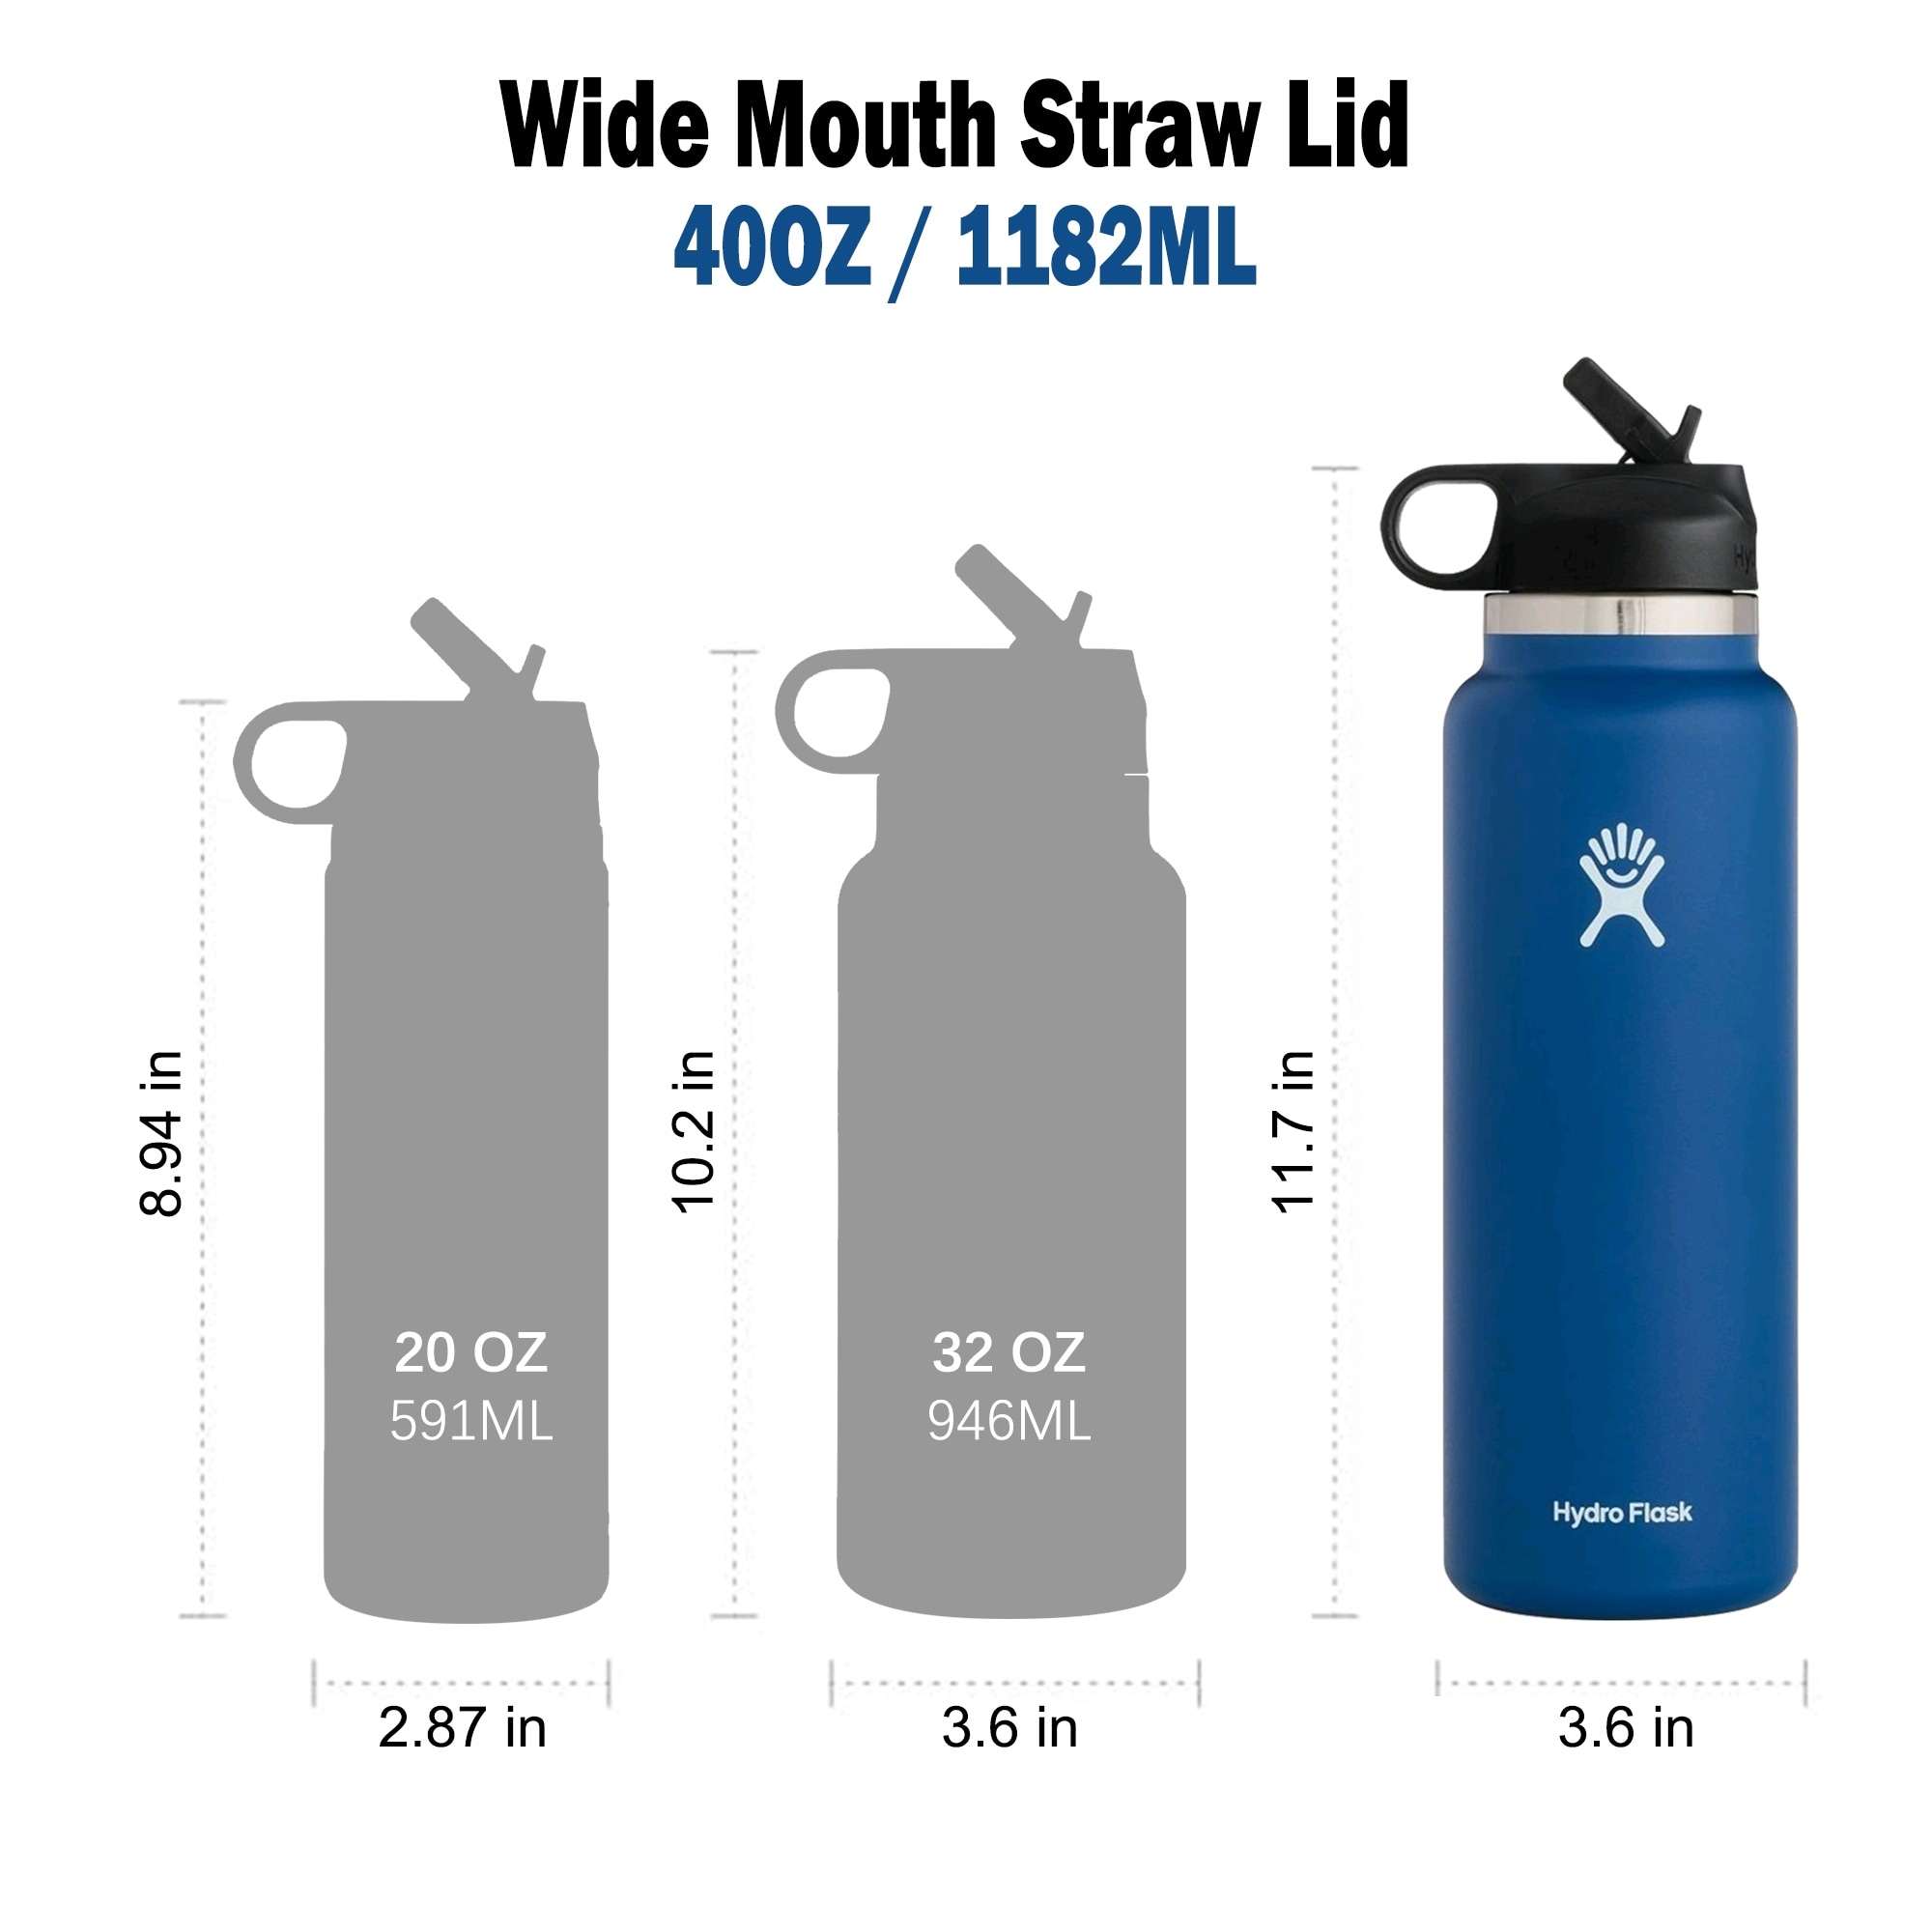 https://ak1.ostkcdn.com/images/products/is/images/direct/0629b51b4e18e54cf83615ece0ec3a0c5bca5cc1/Hydro-Flask-40oz-Wide-Mouth-Straw-Lid.jpg